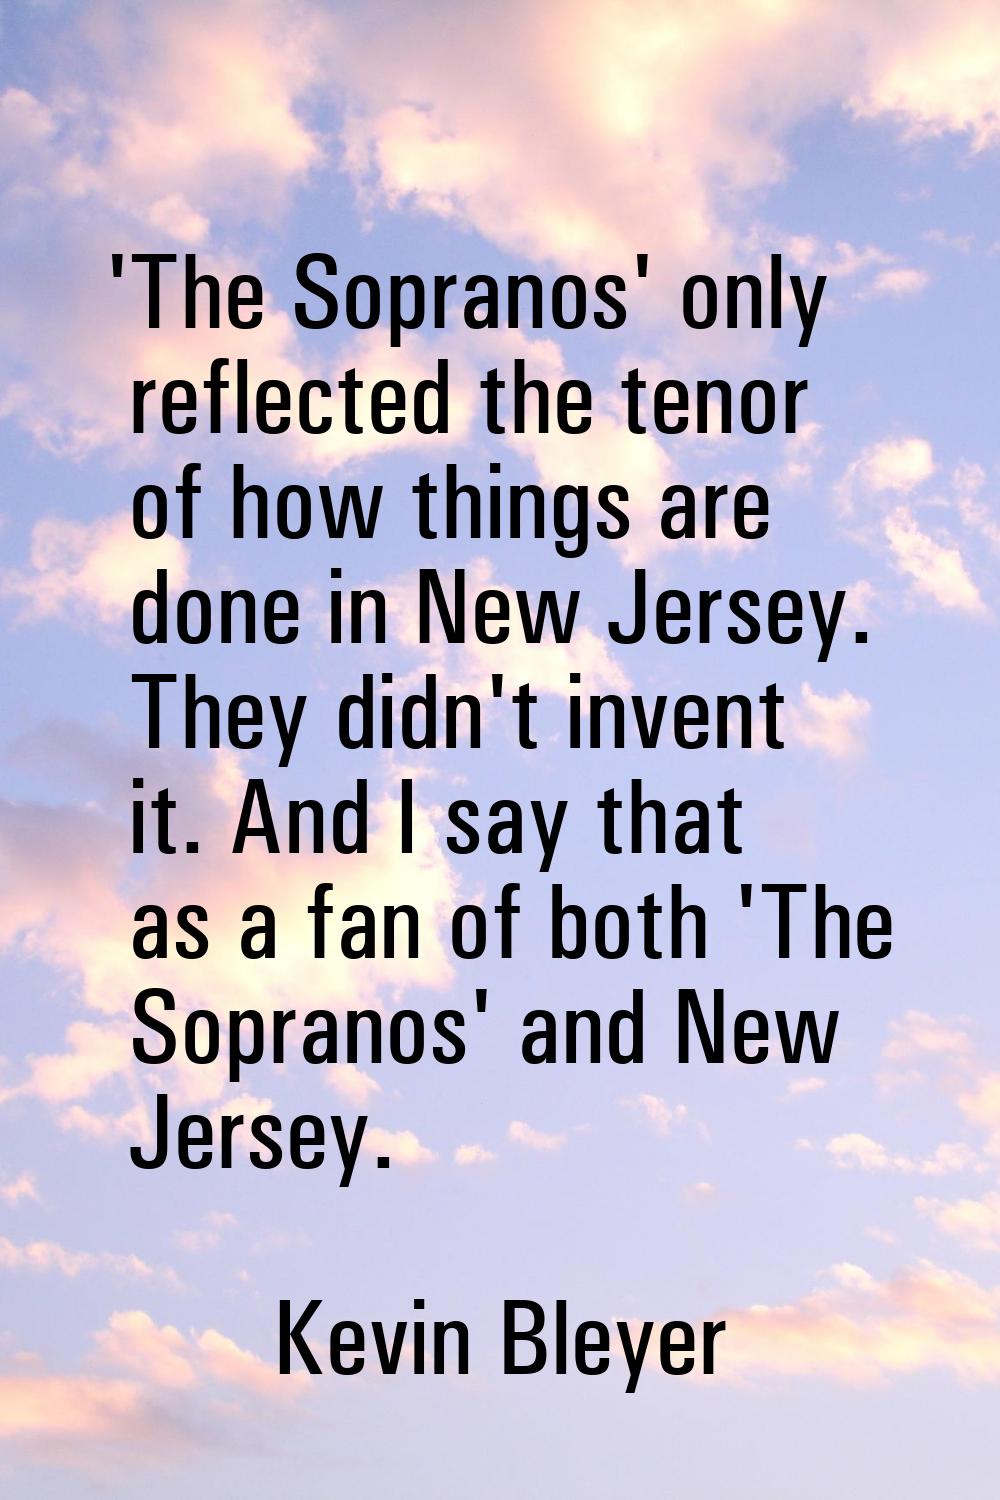 'The Sopranos' only reflected the tenor of how things are done in New Jersey. They didn't invent it